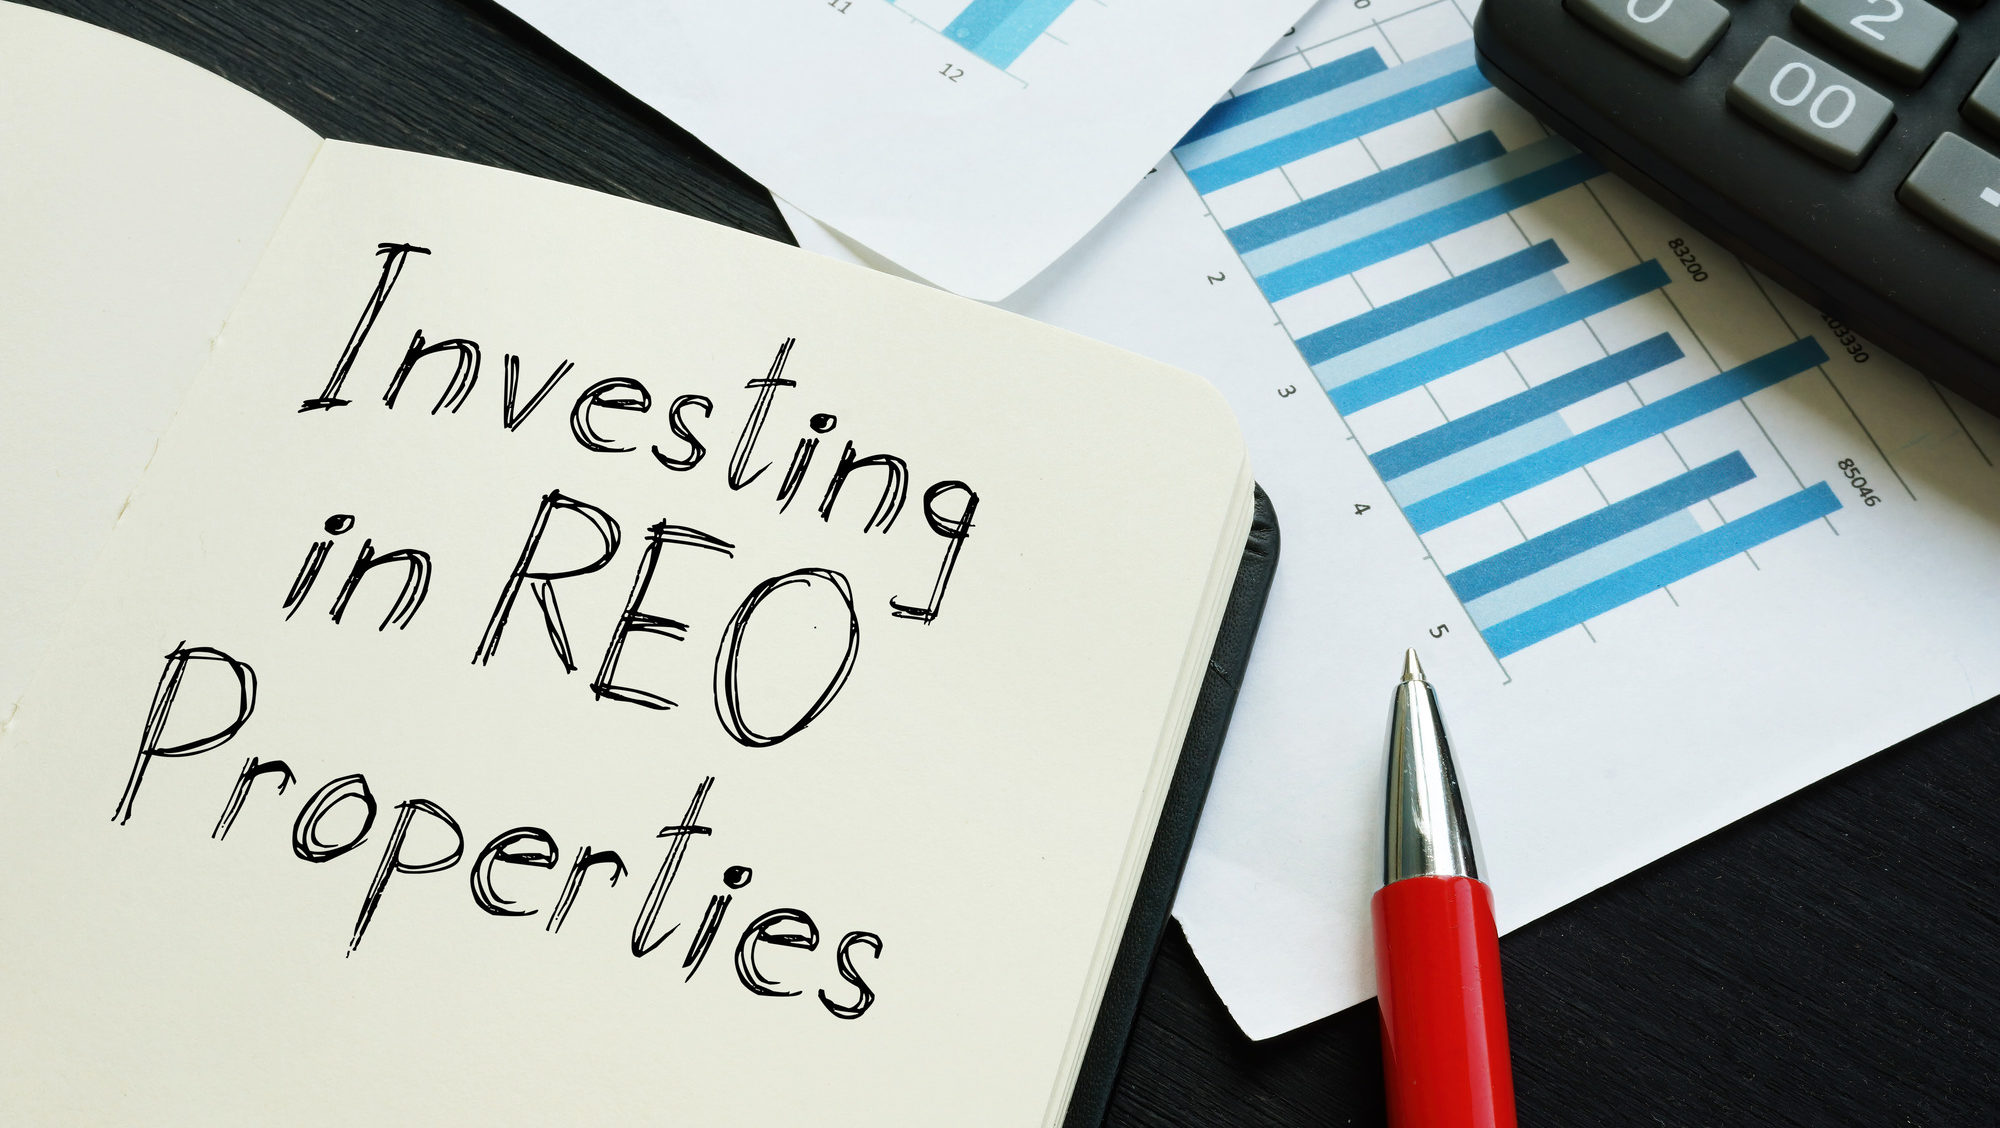 In an open lined notebook, "Investing in REO Properties" is written in black ink.